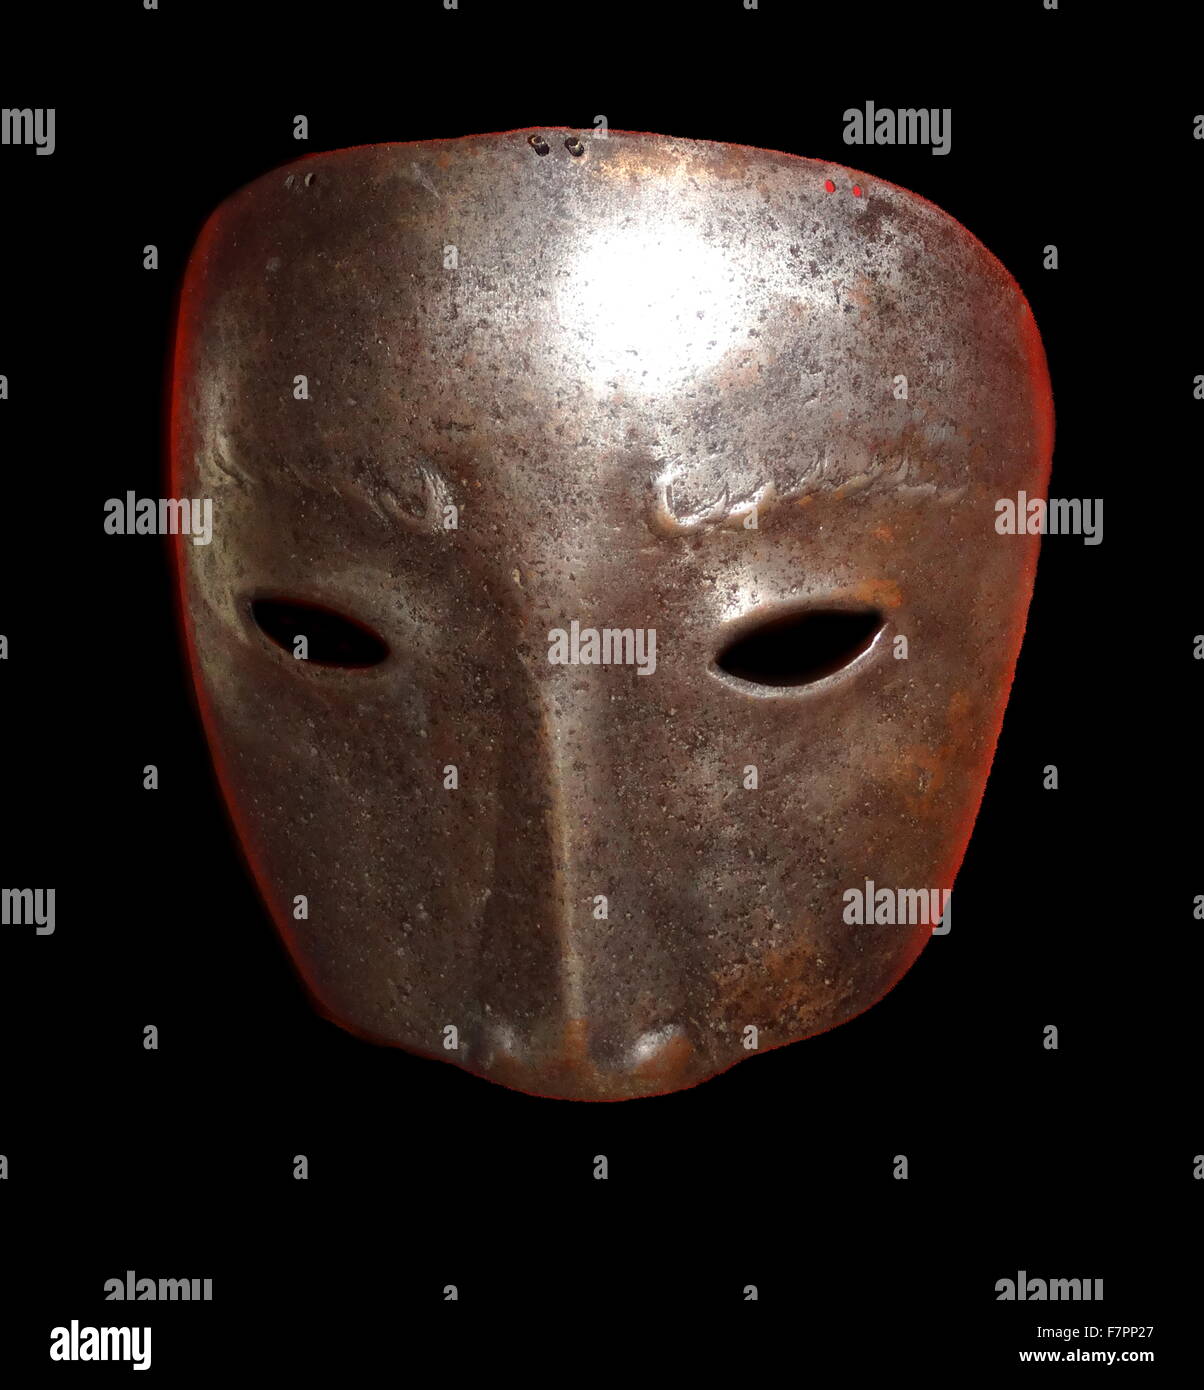 Executioner's mask. From a time of particular unrest in Portuguese history which culminated in the public execution of relatives of the king. Steel, Portuguese, 1501-1800. Stock Photo